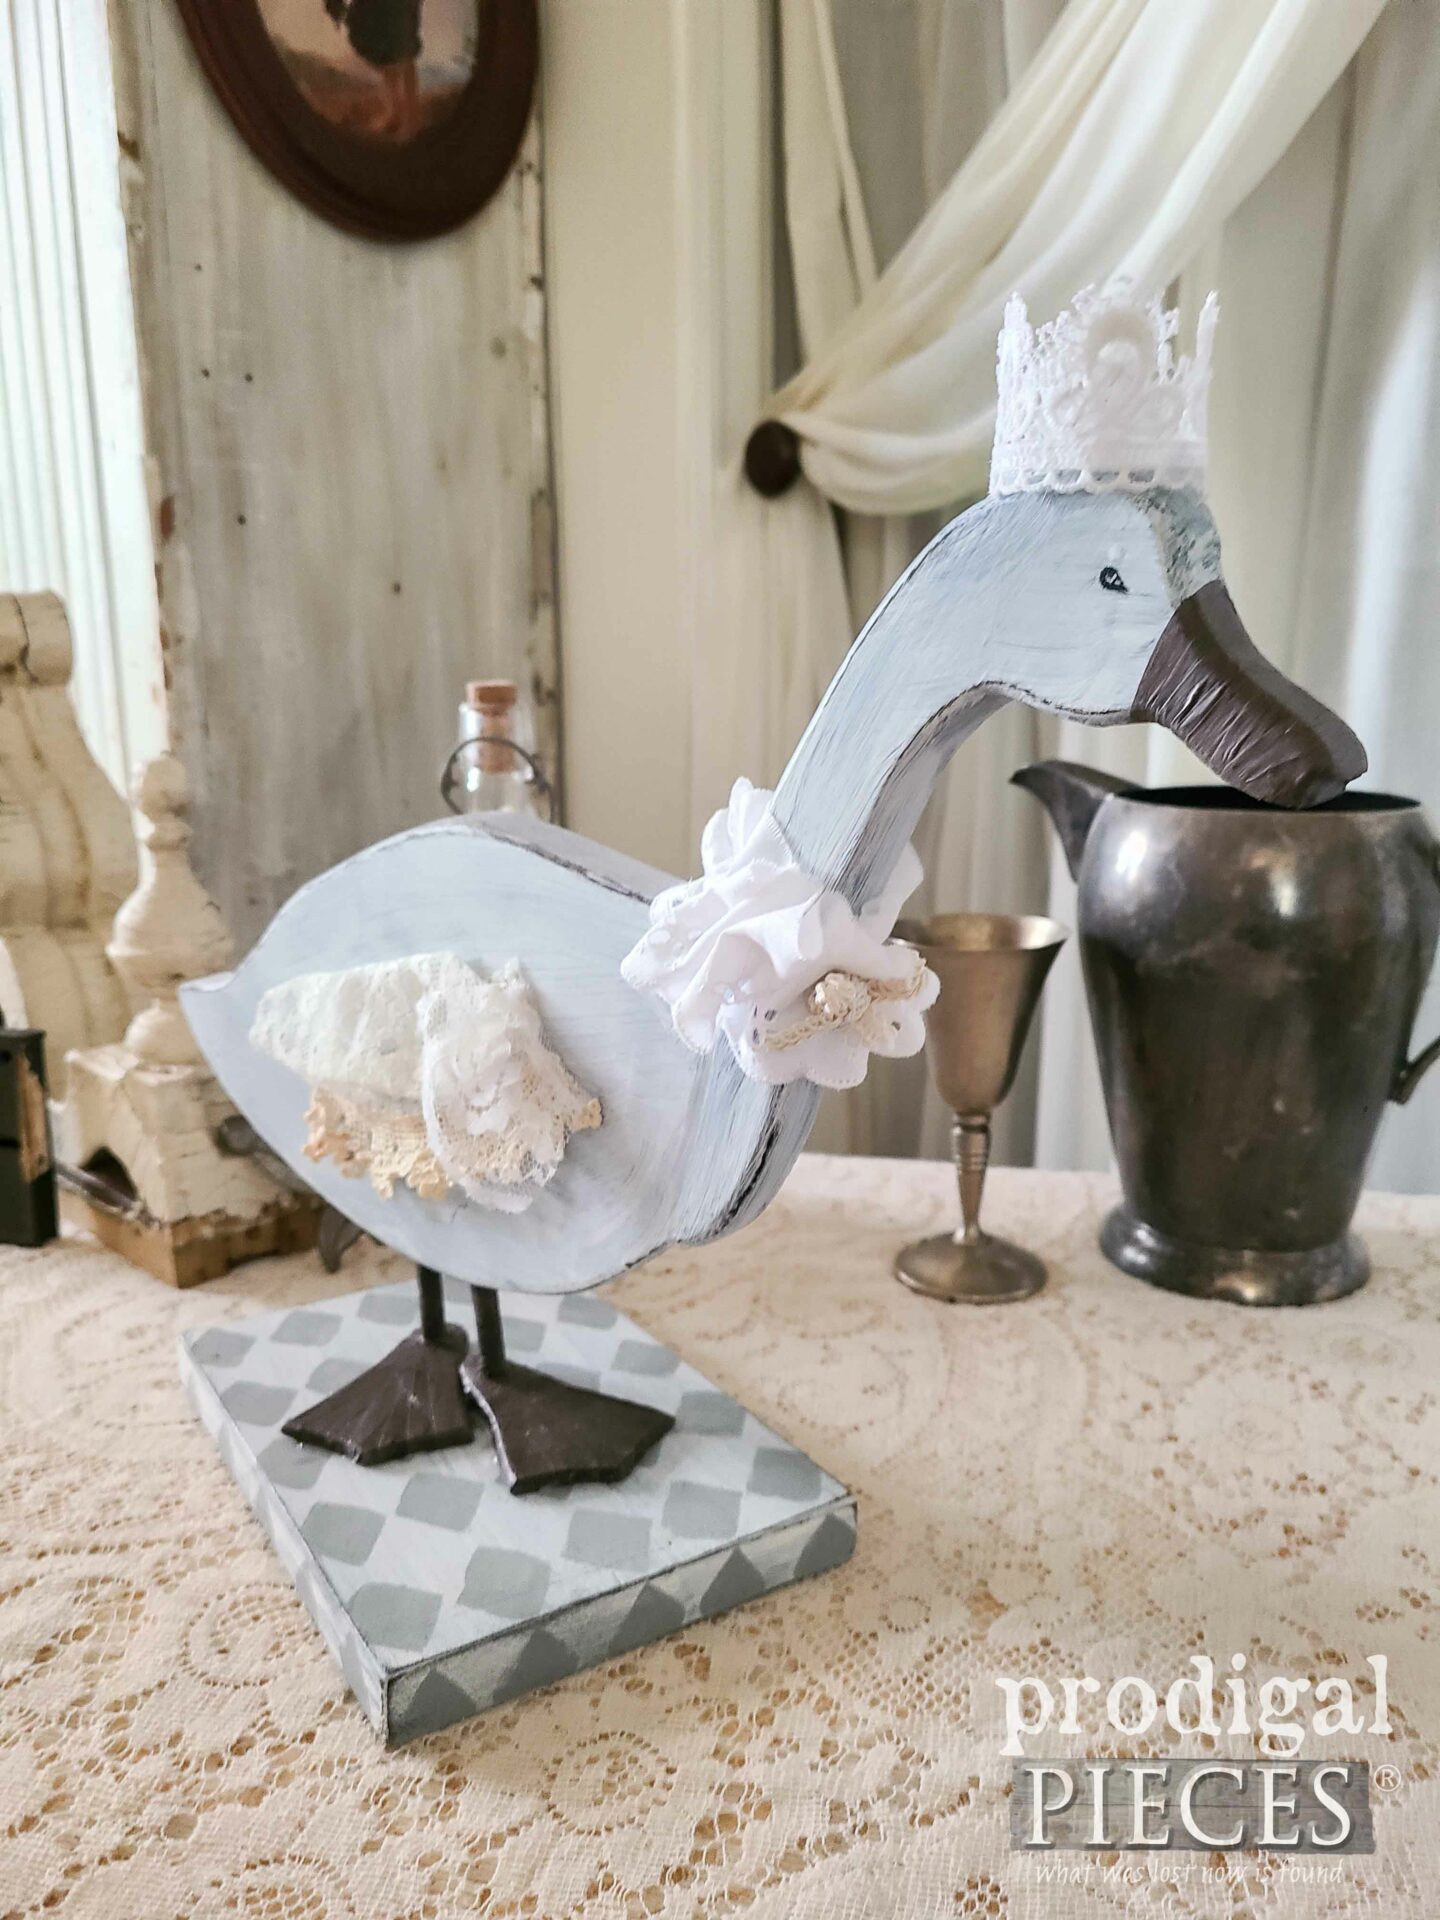 Handmade French Shabby Chic Goose created by Larissa of Prodigal Pieces | prodigalpieces.com #prodigalpieces #shabbychic #diy #thifted #upcycled